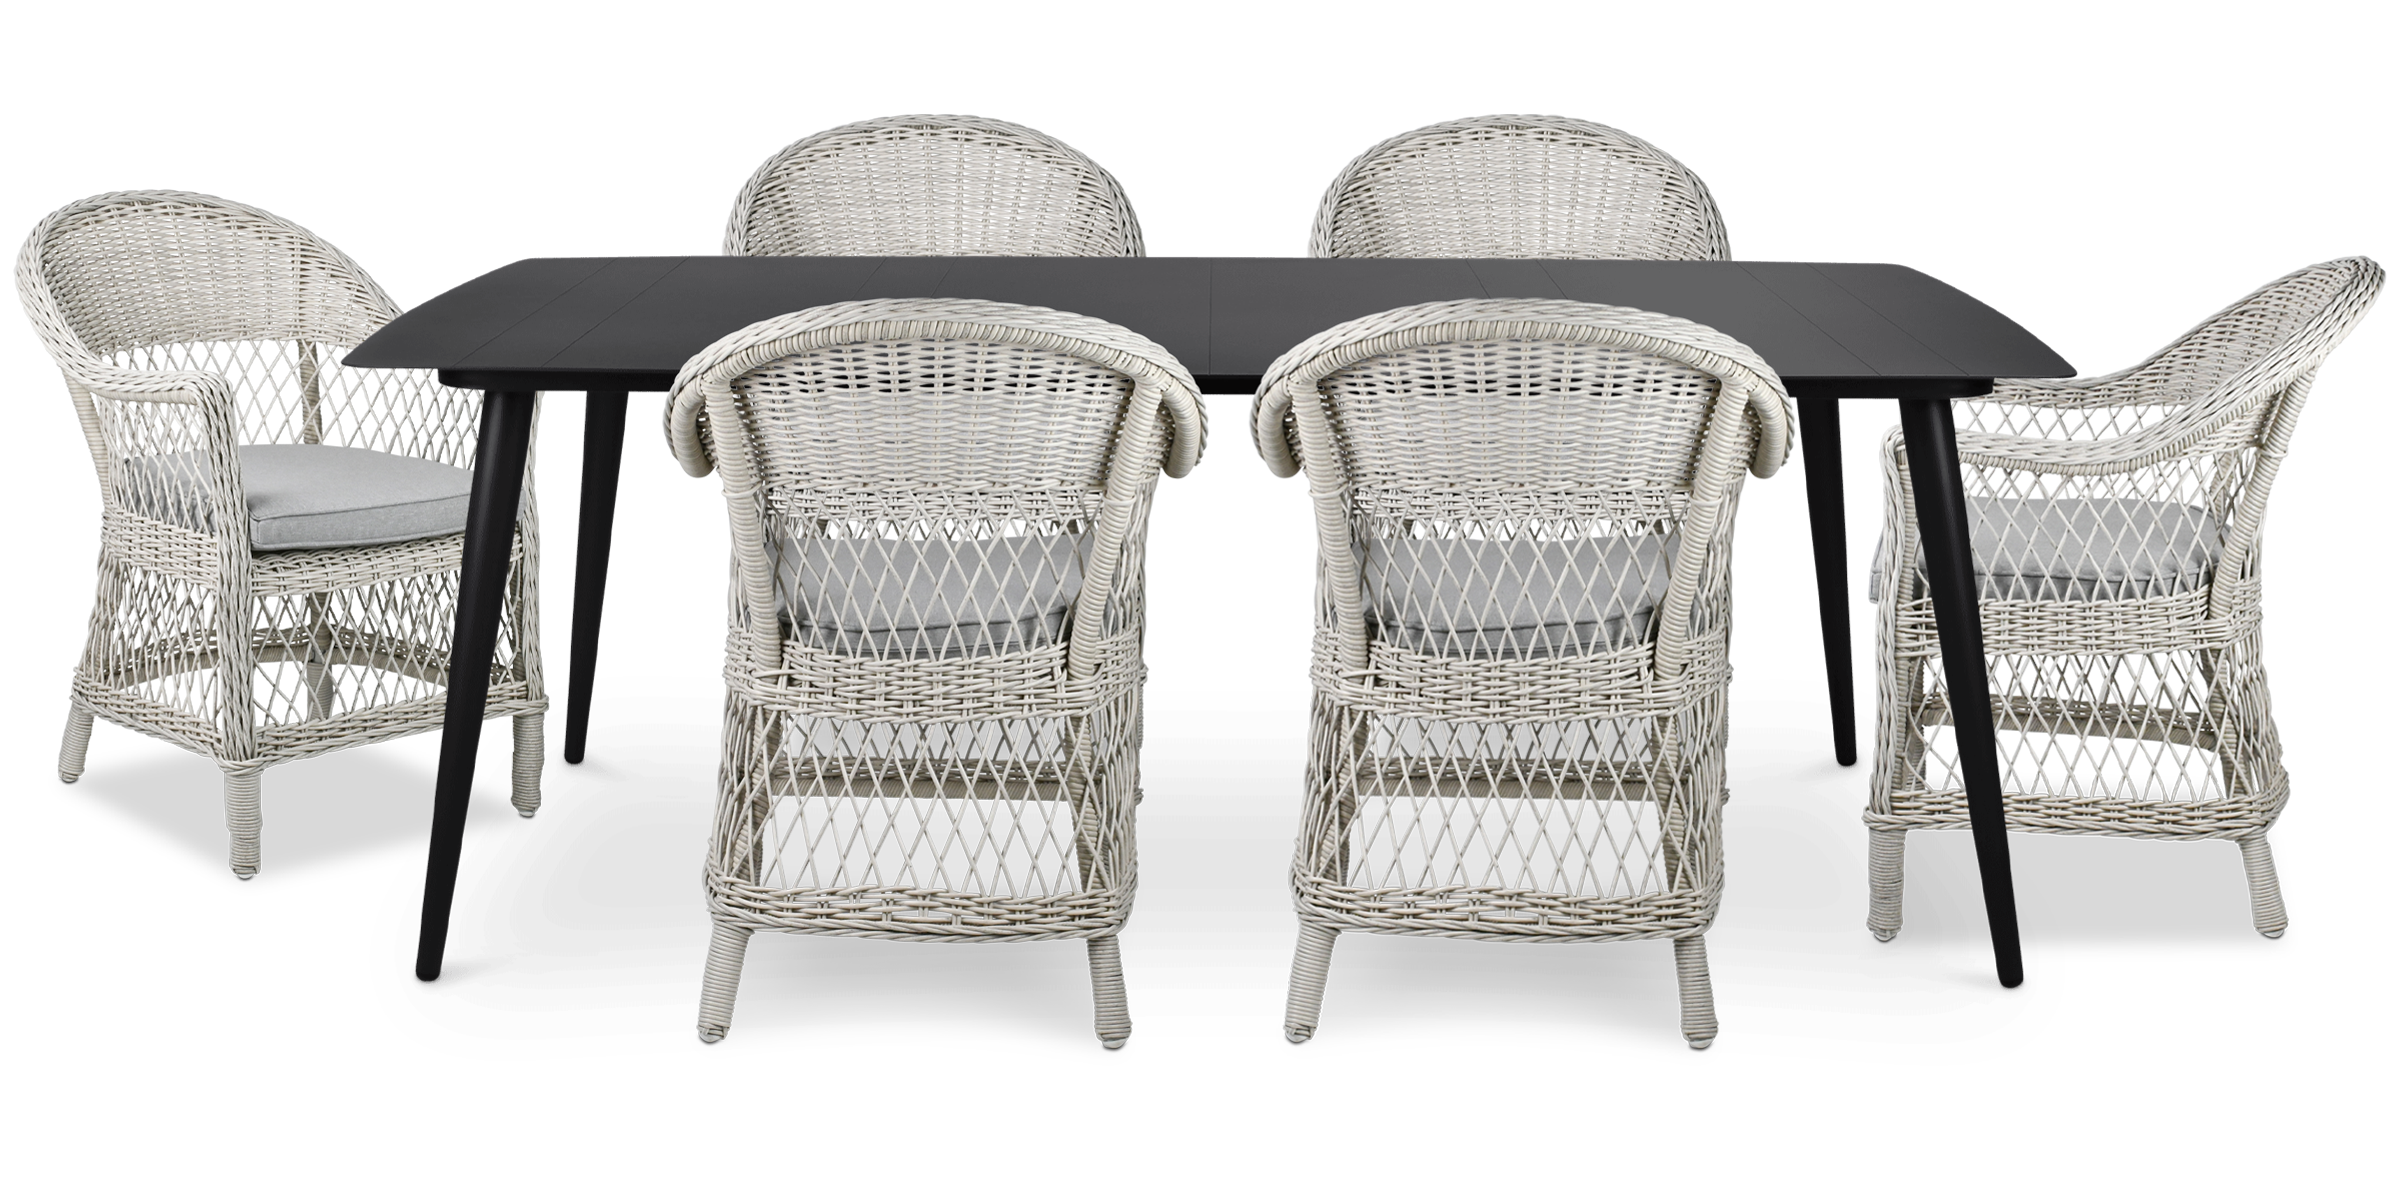 Amalfi Rectangle 7 Piece Outdoor Setting in Gunmetal with Wicker Chairs